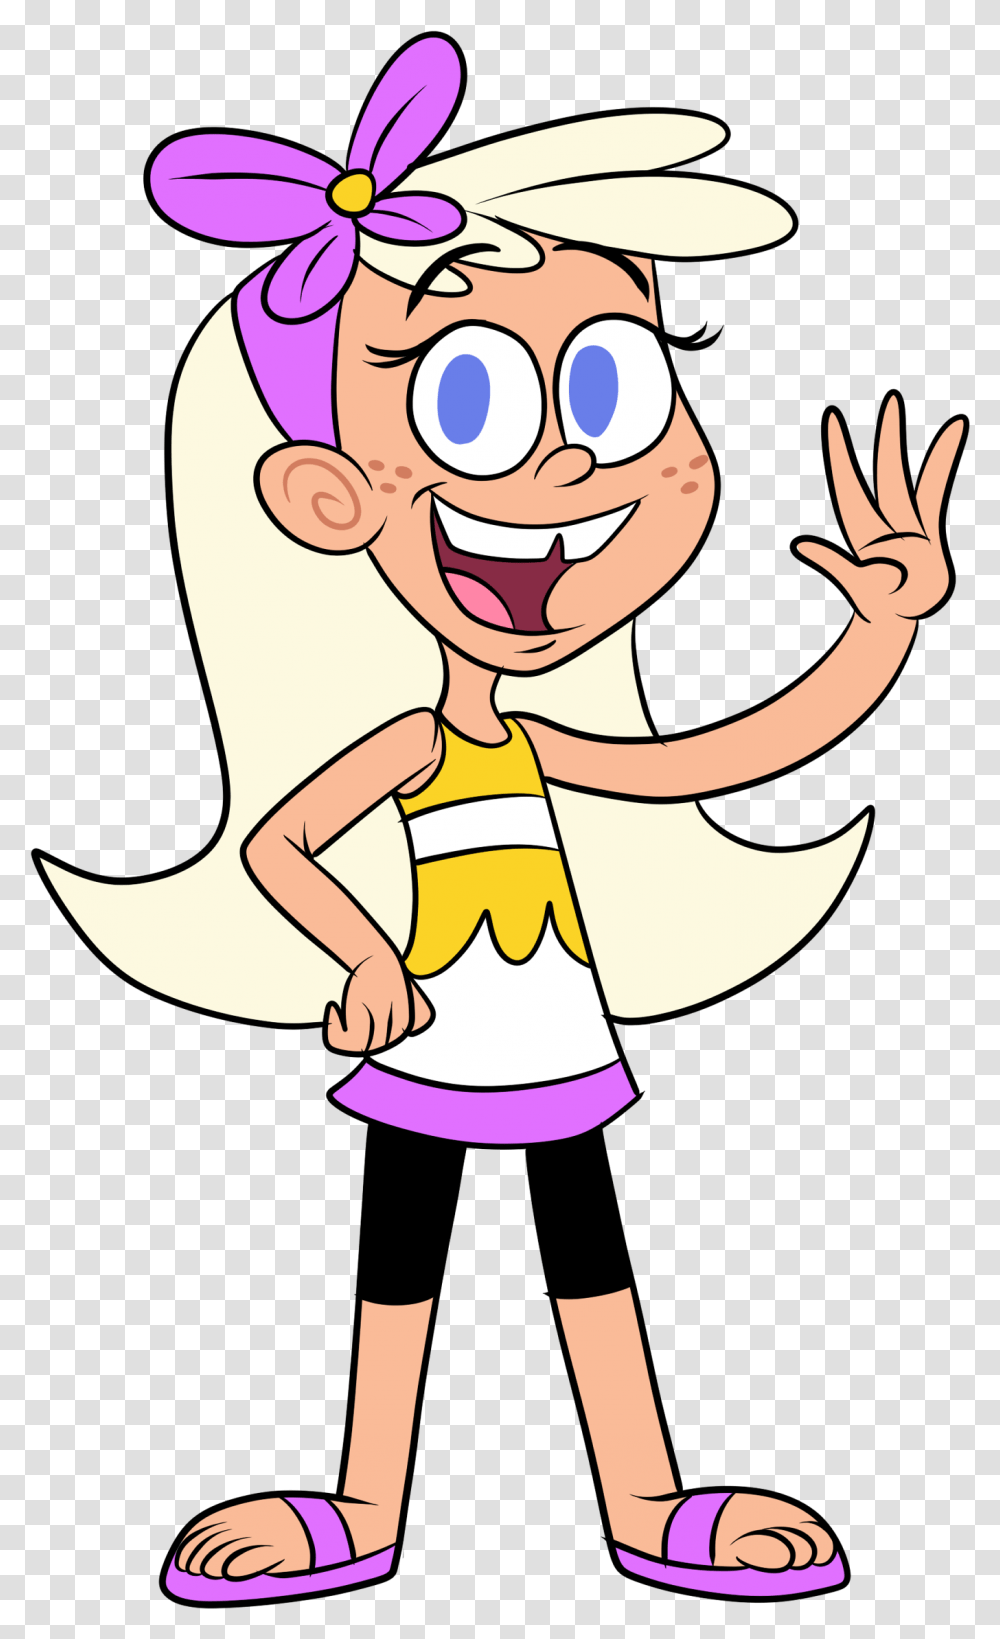 Fairly Odd Parents Chloe Carmichael Thicc, Person, Human, Elf, Performer Transparent Png